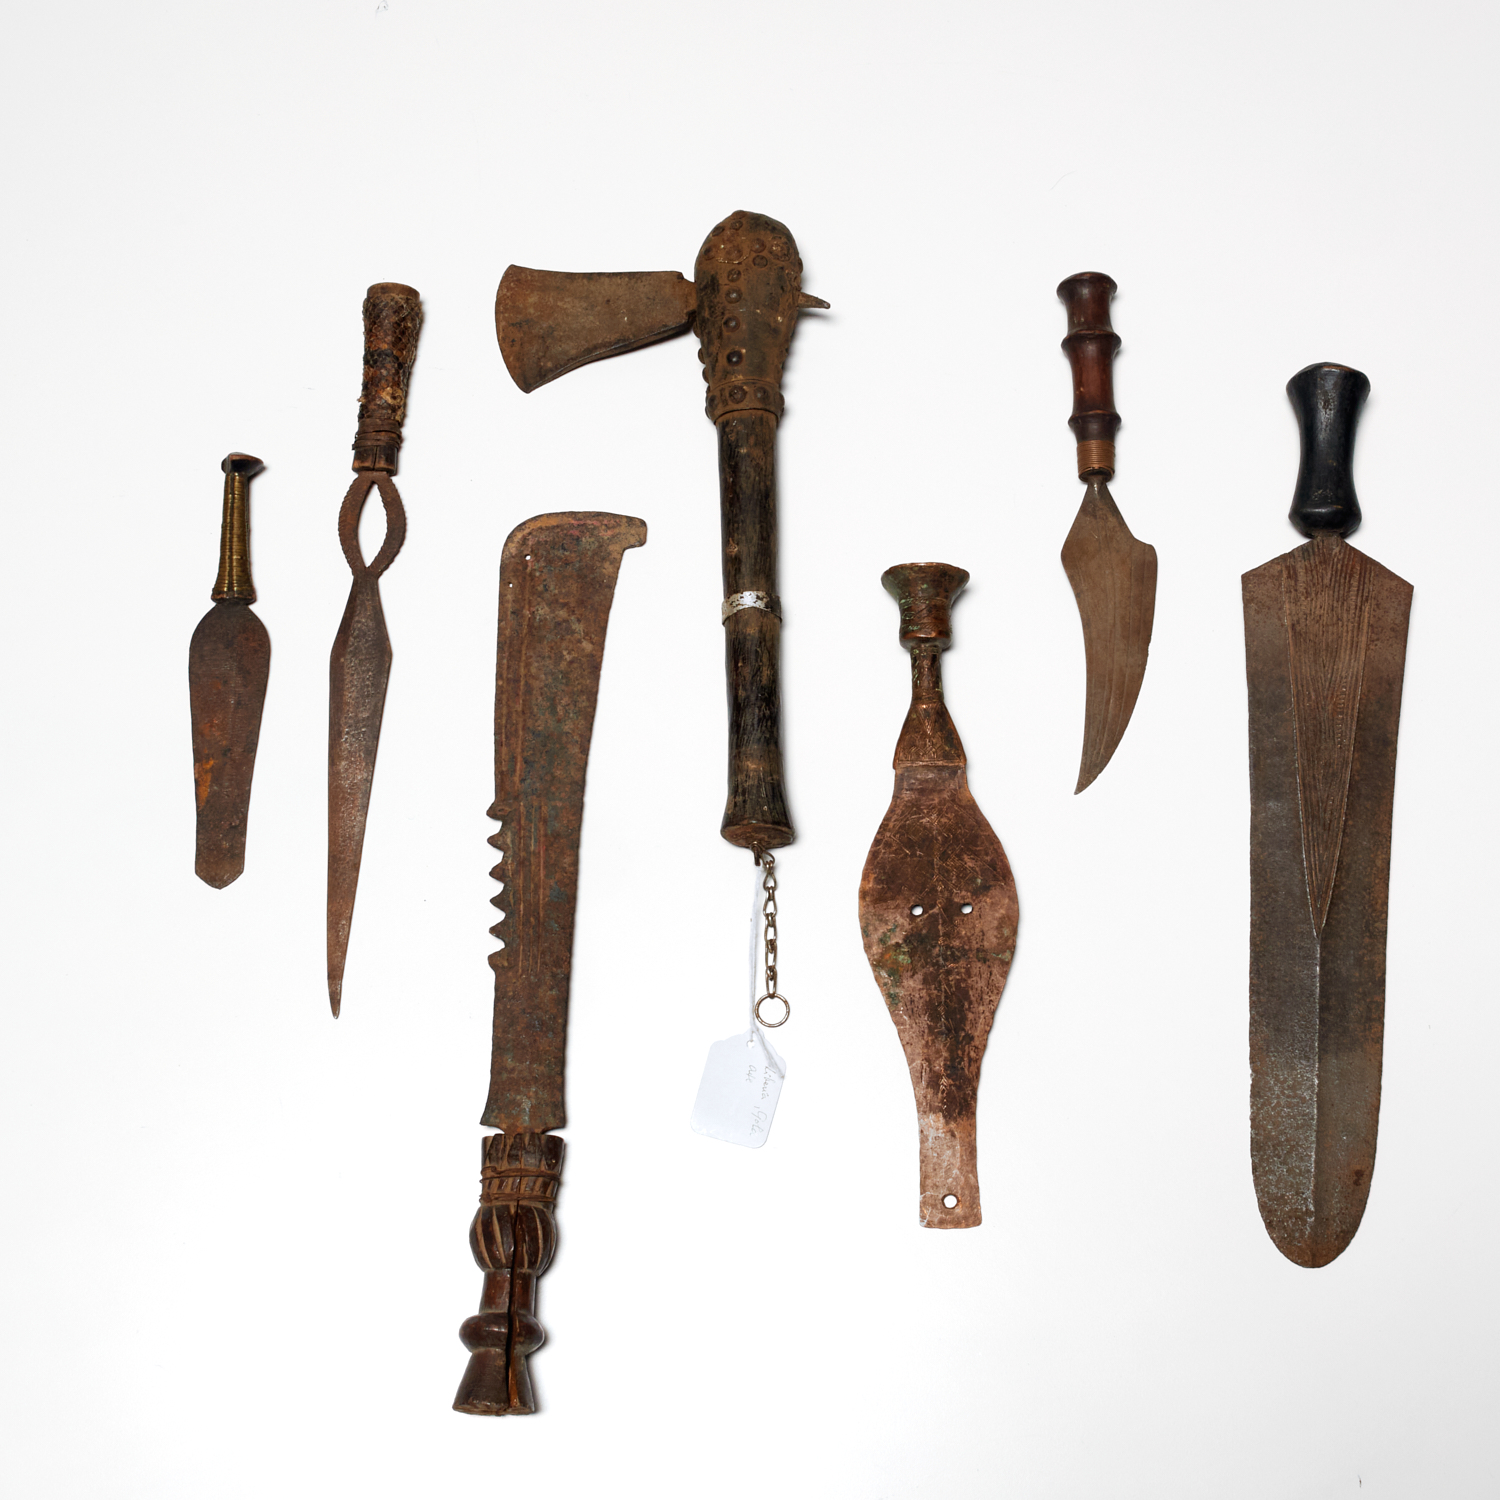 GROUP 7 AFRICAN KNIVES AND TOOLS 361548